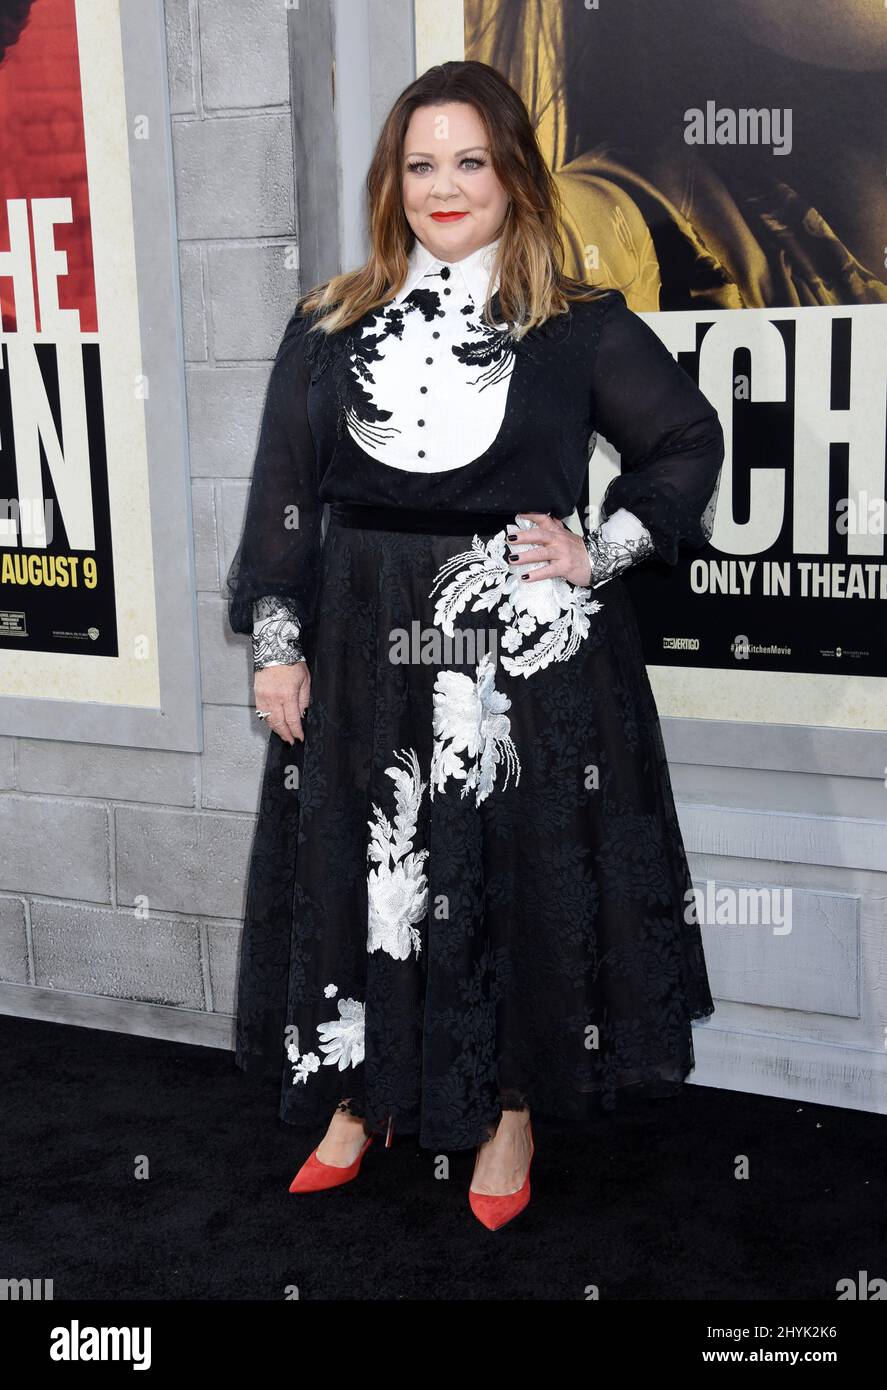 Melissa McCarthy at 'The Kitchen' world premiere held at the TCL Chinese Theatre on August 5, 2019 in Hollywood, Los Angeles. Stock Photo